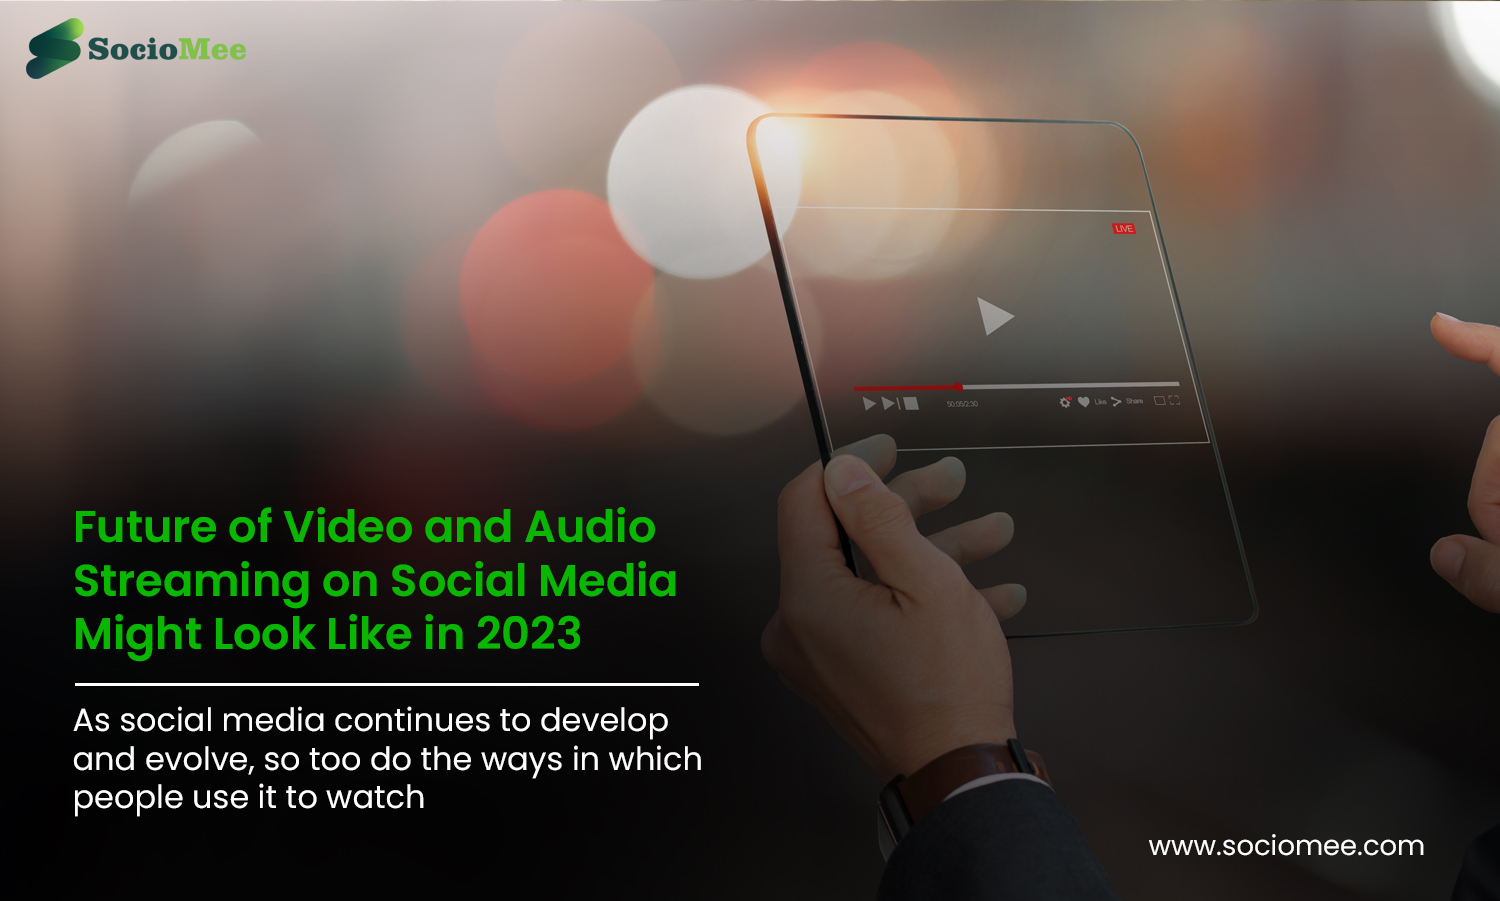 What the Future of Video and Audio Streaming on Social Media Might Look Like in